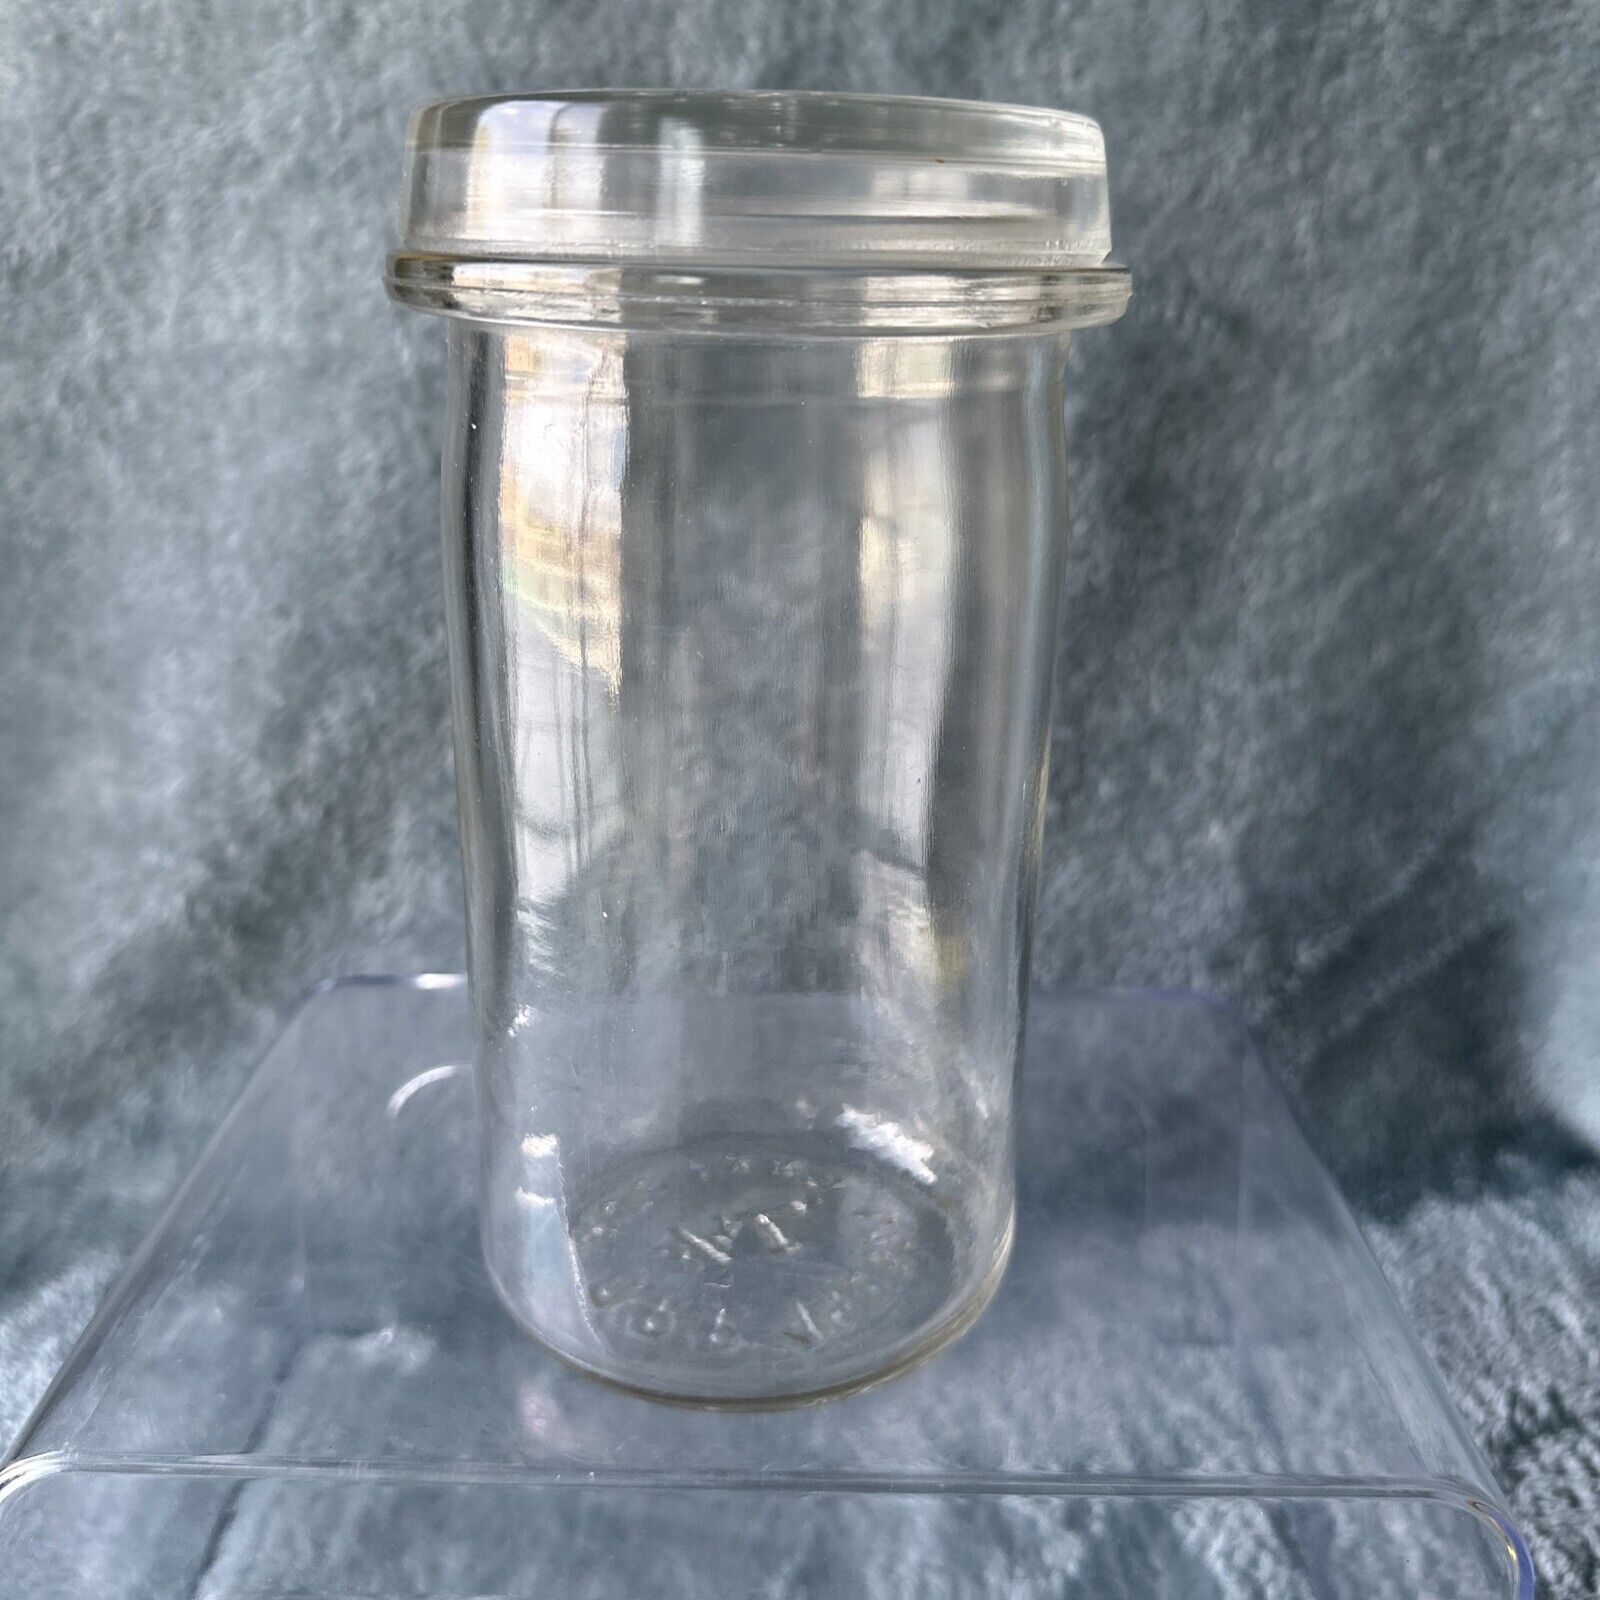 Antique Adler Conservenglas Canning Food Jar German Glass Late 1890-early 1900s